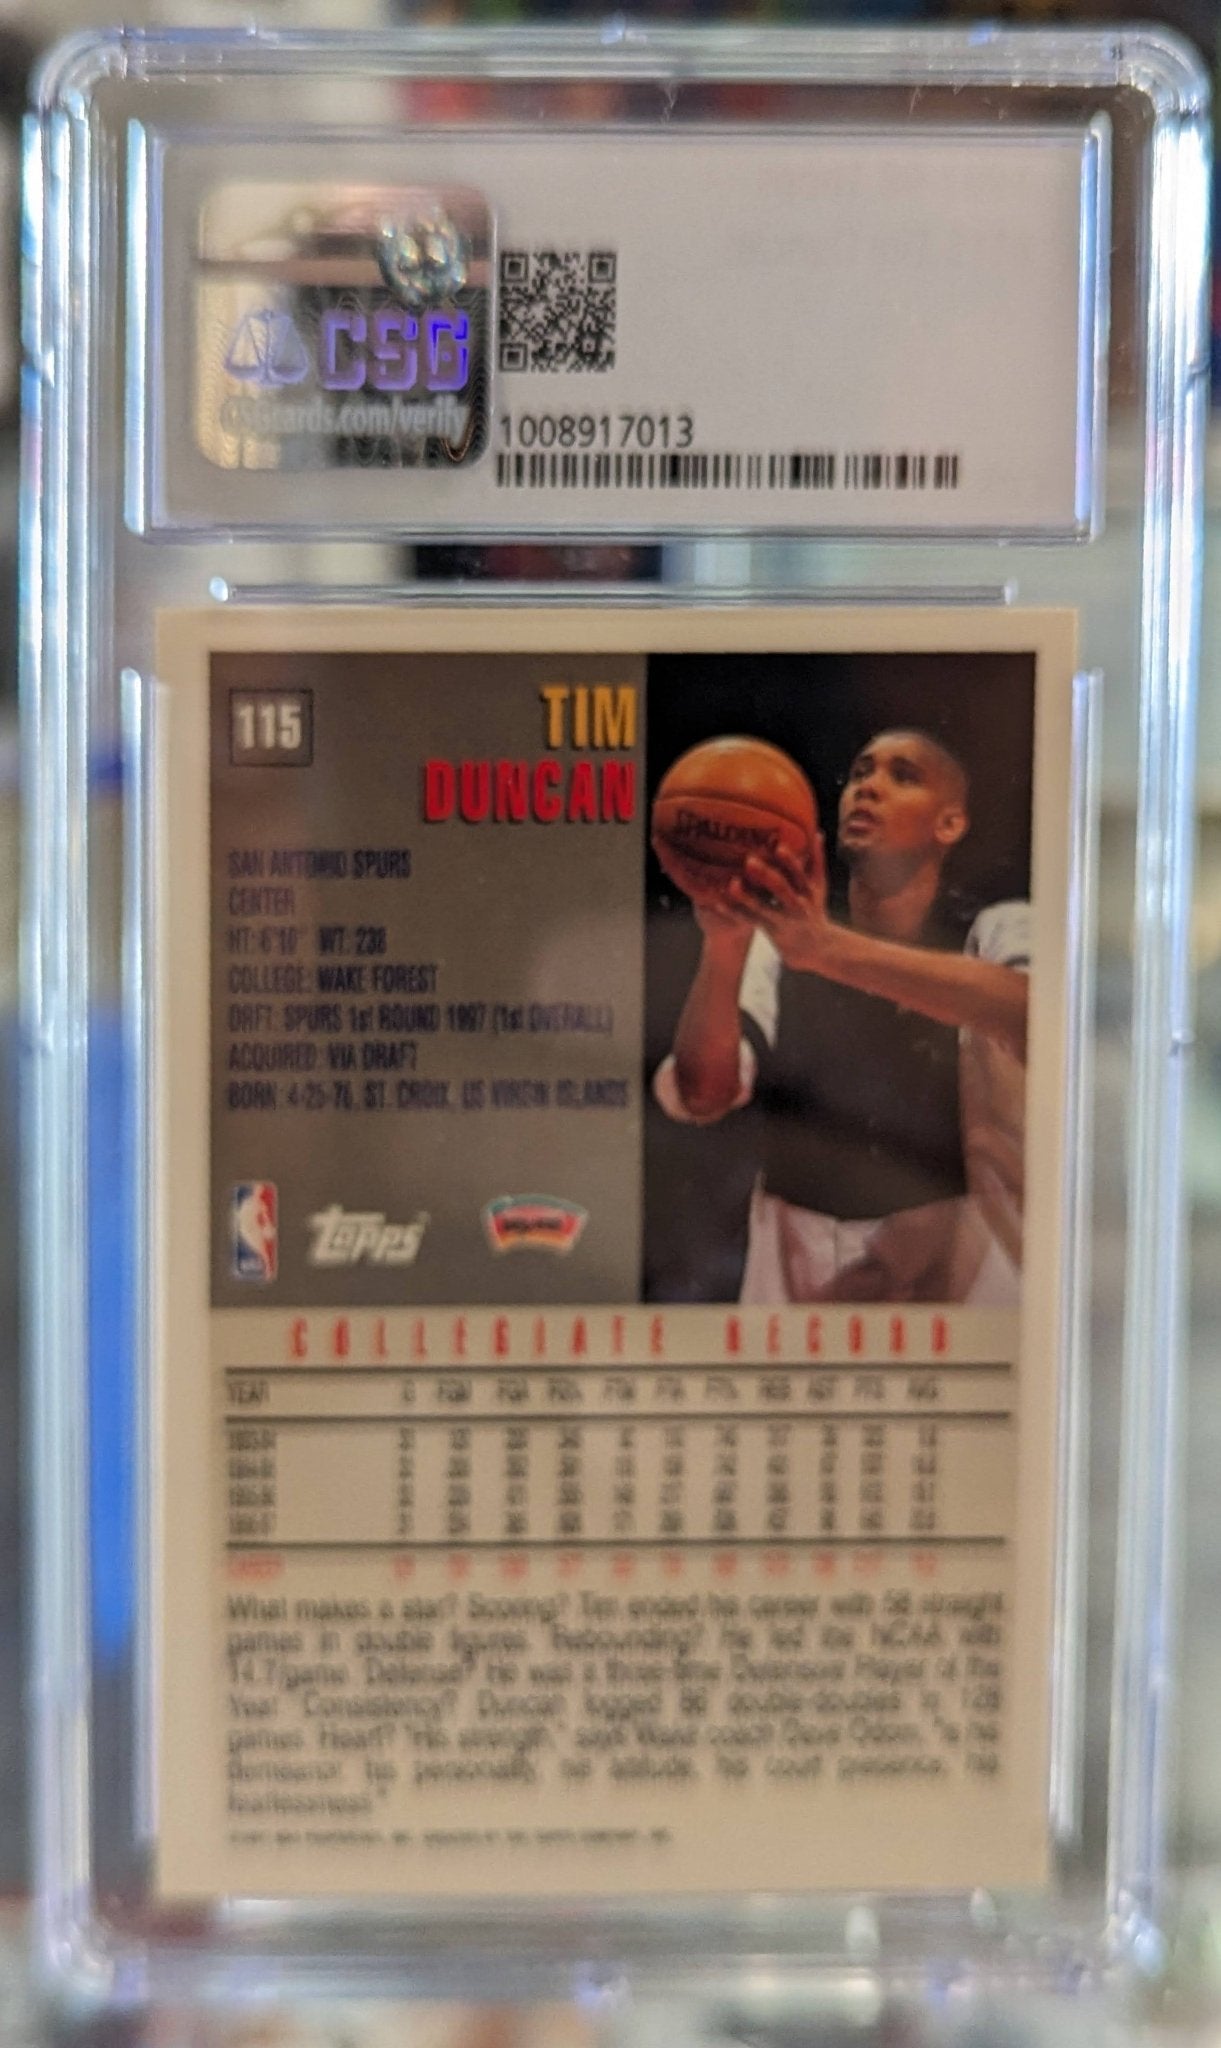 1997-98 Topps Tim Duncan Rookie Card CSG 9 - Covert Comics and Collectibles